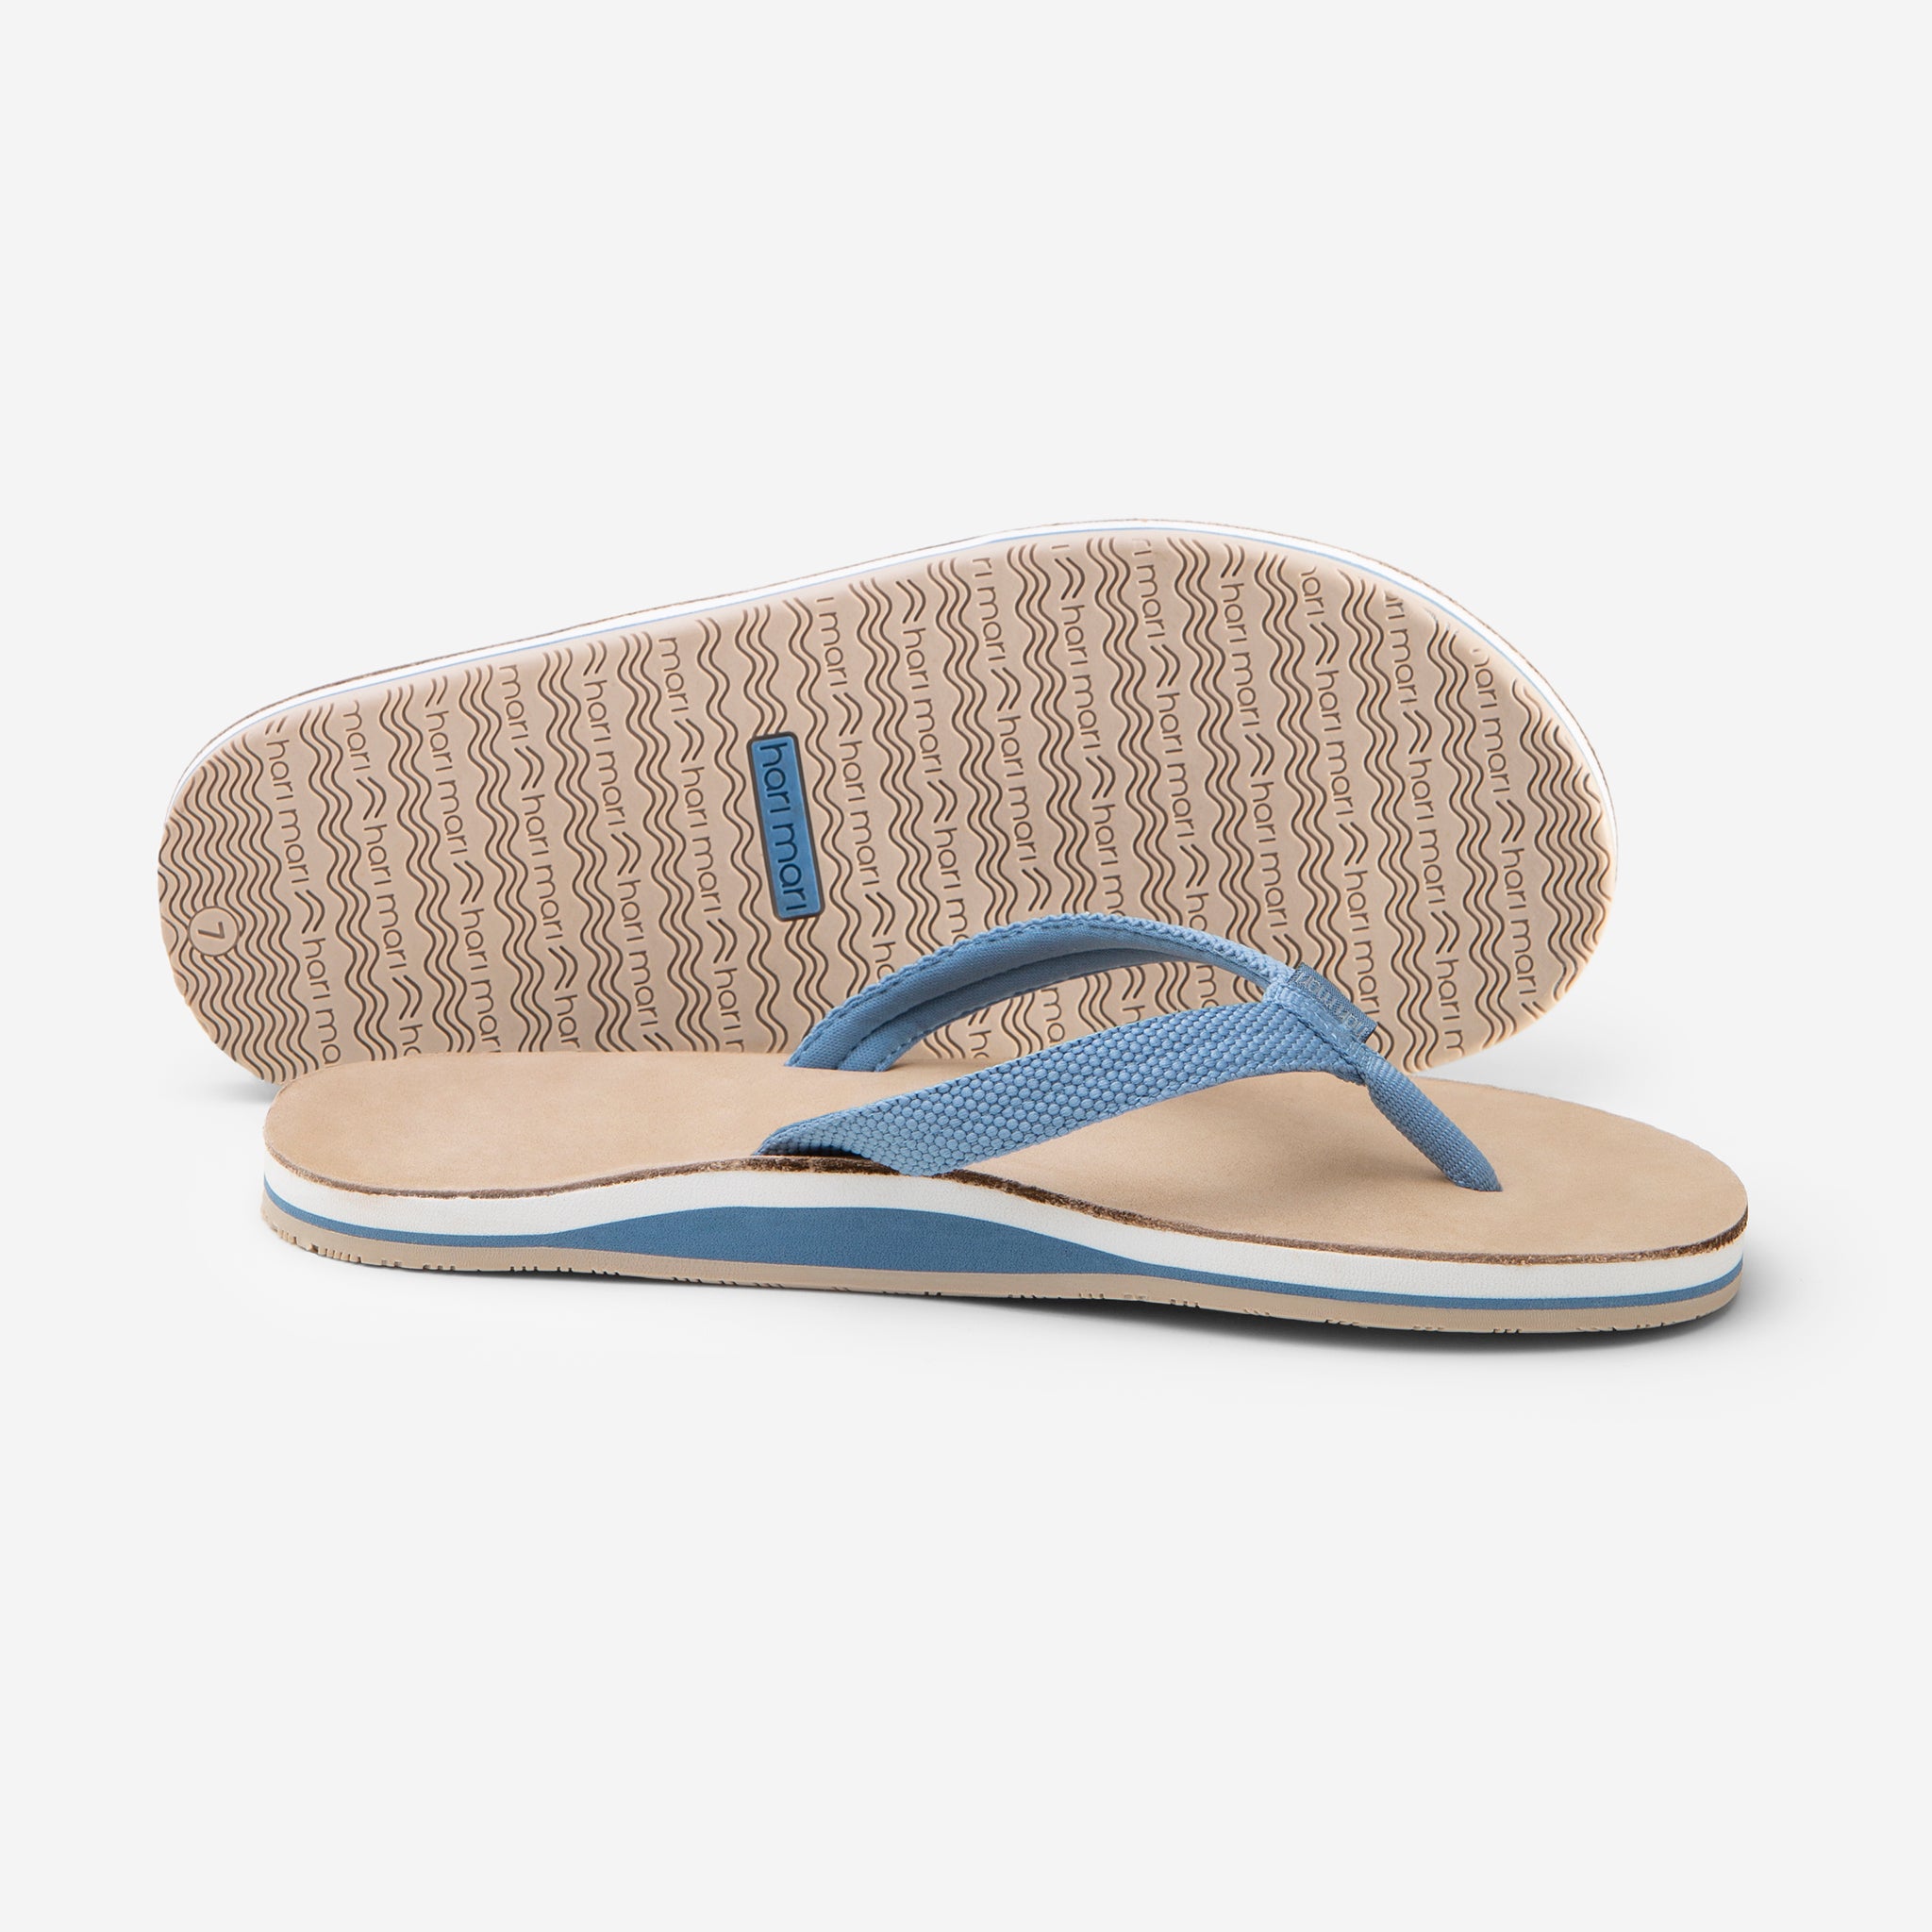 Hari Mari Women's Scouts in Dusty Blue/Sand picture showing flip flop and bottom of shoe rubber outsole on white background